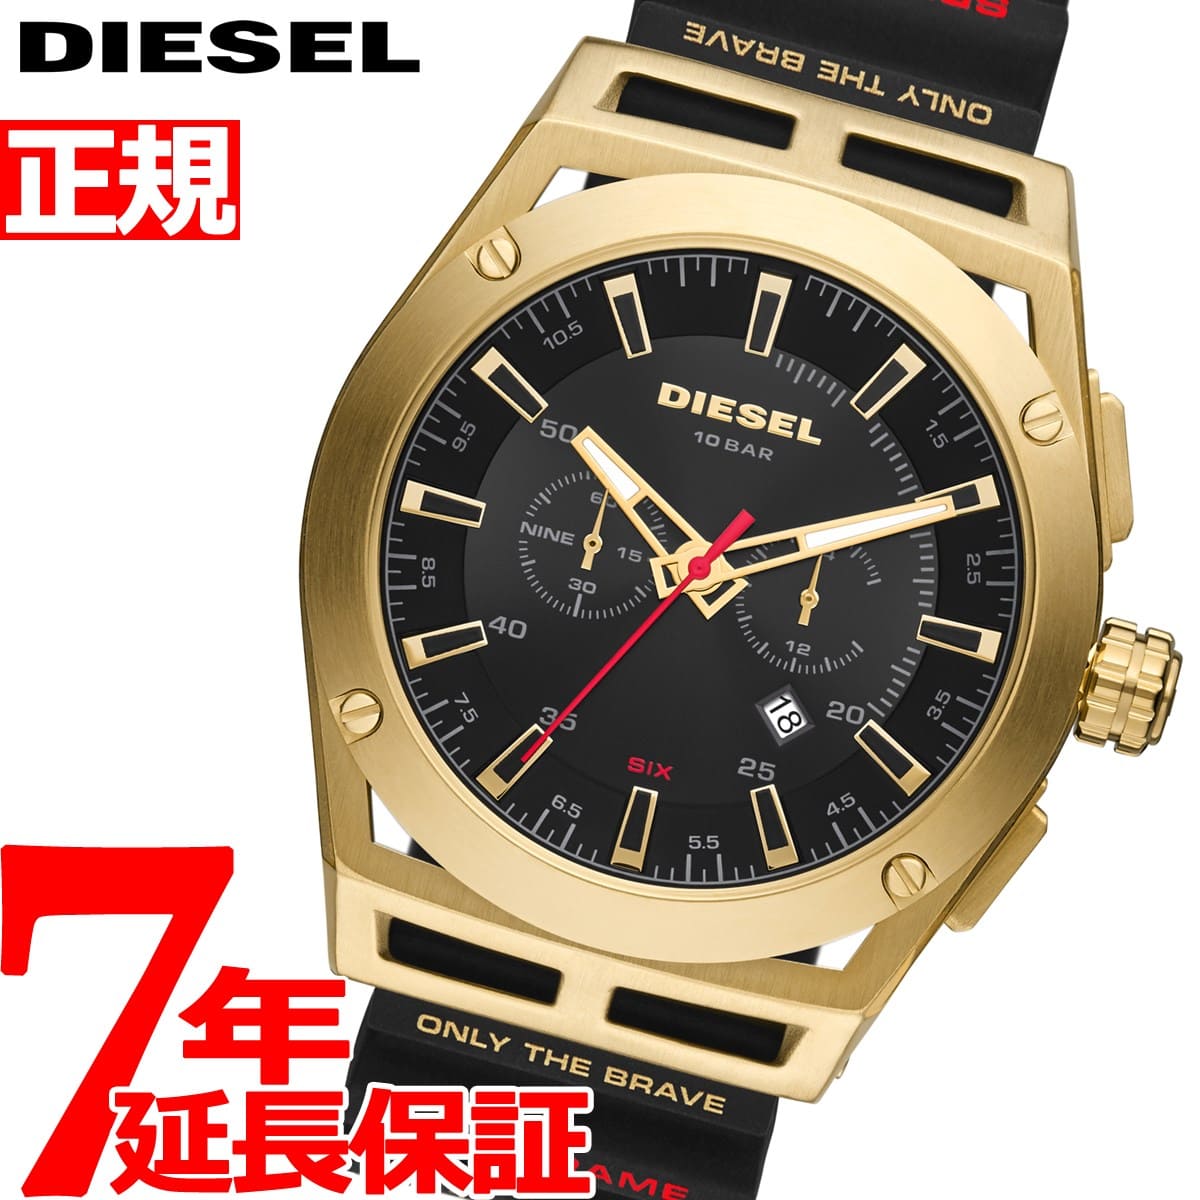 March DZ4546 on in BE - up & 4 on to March It frame 2021 57 Chronograph mens latest FORWARD 2,000 1:59 time New]up - diesel TIMEFRAME to is Store 11 at times! DIESEL until 20:00